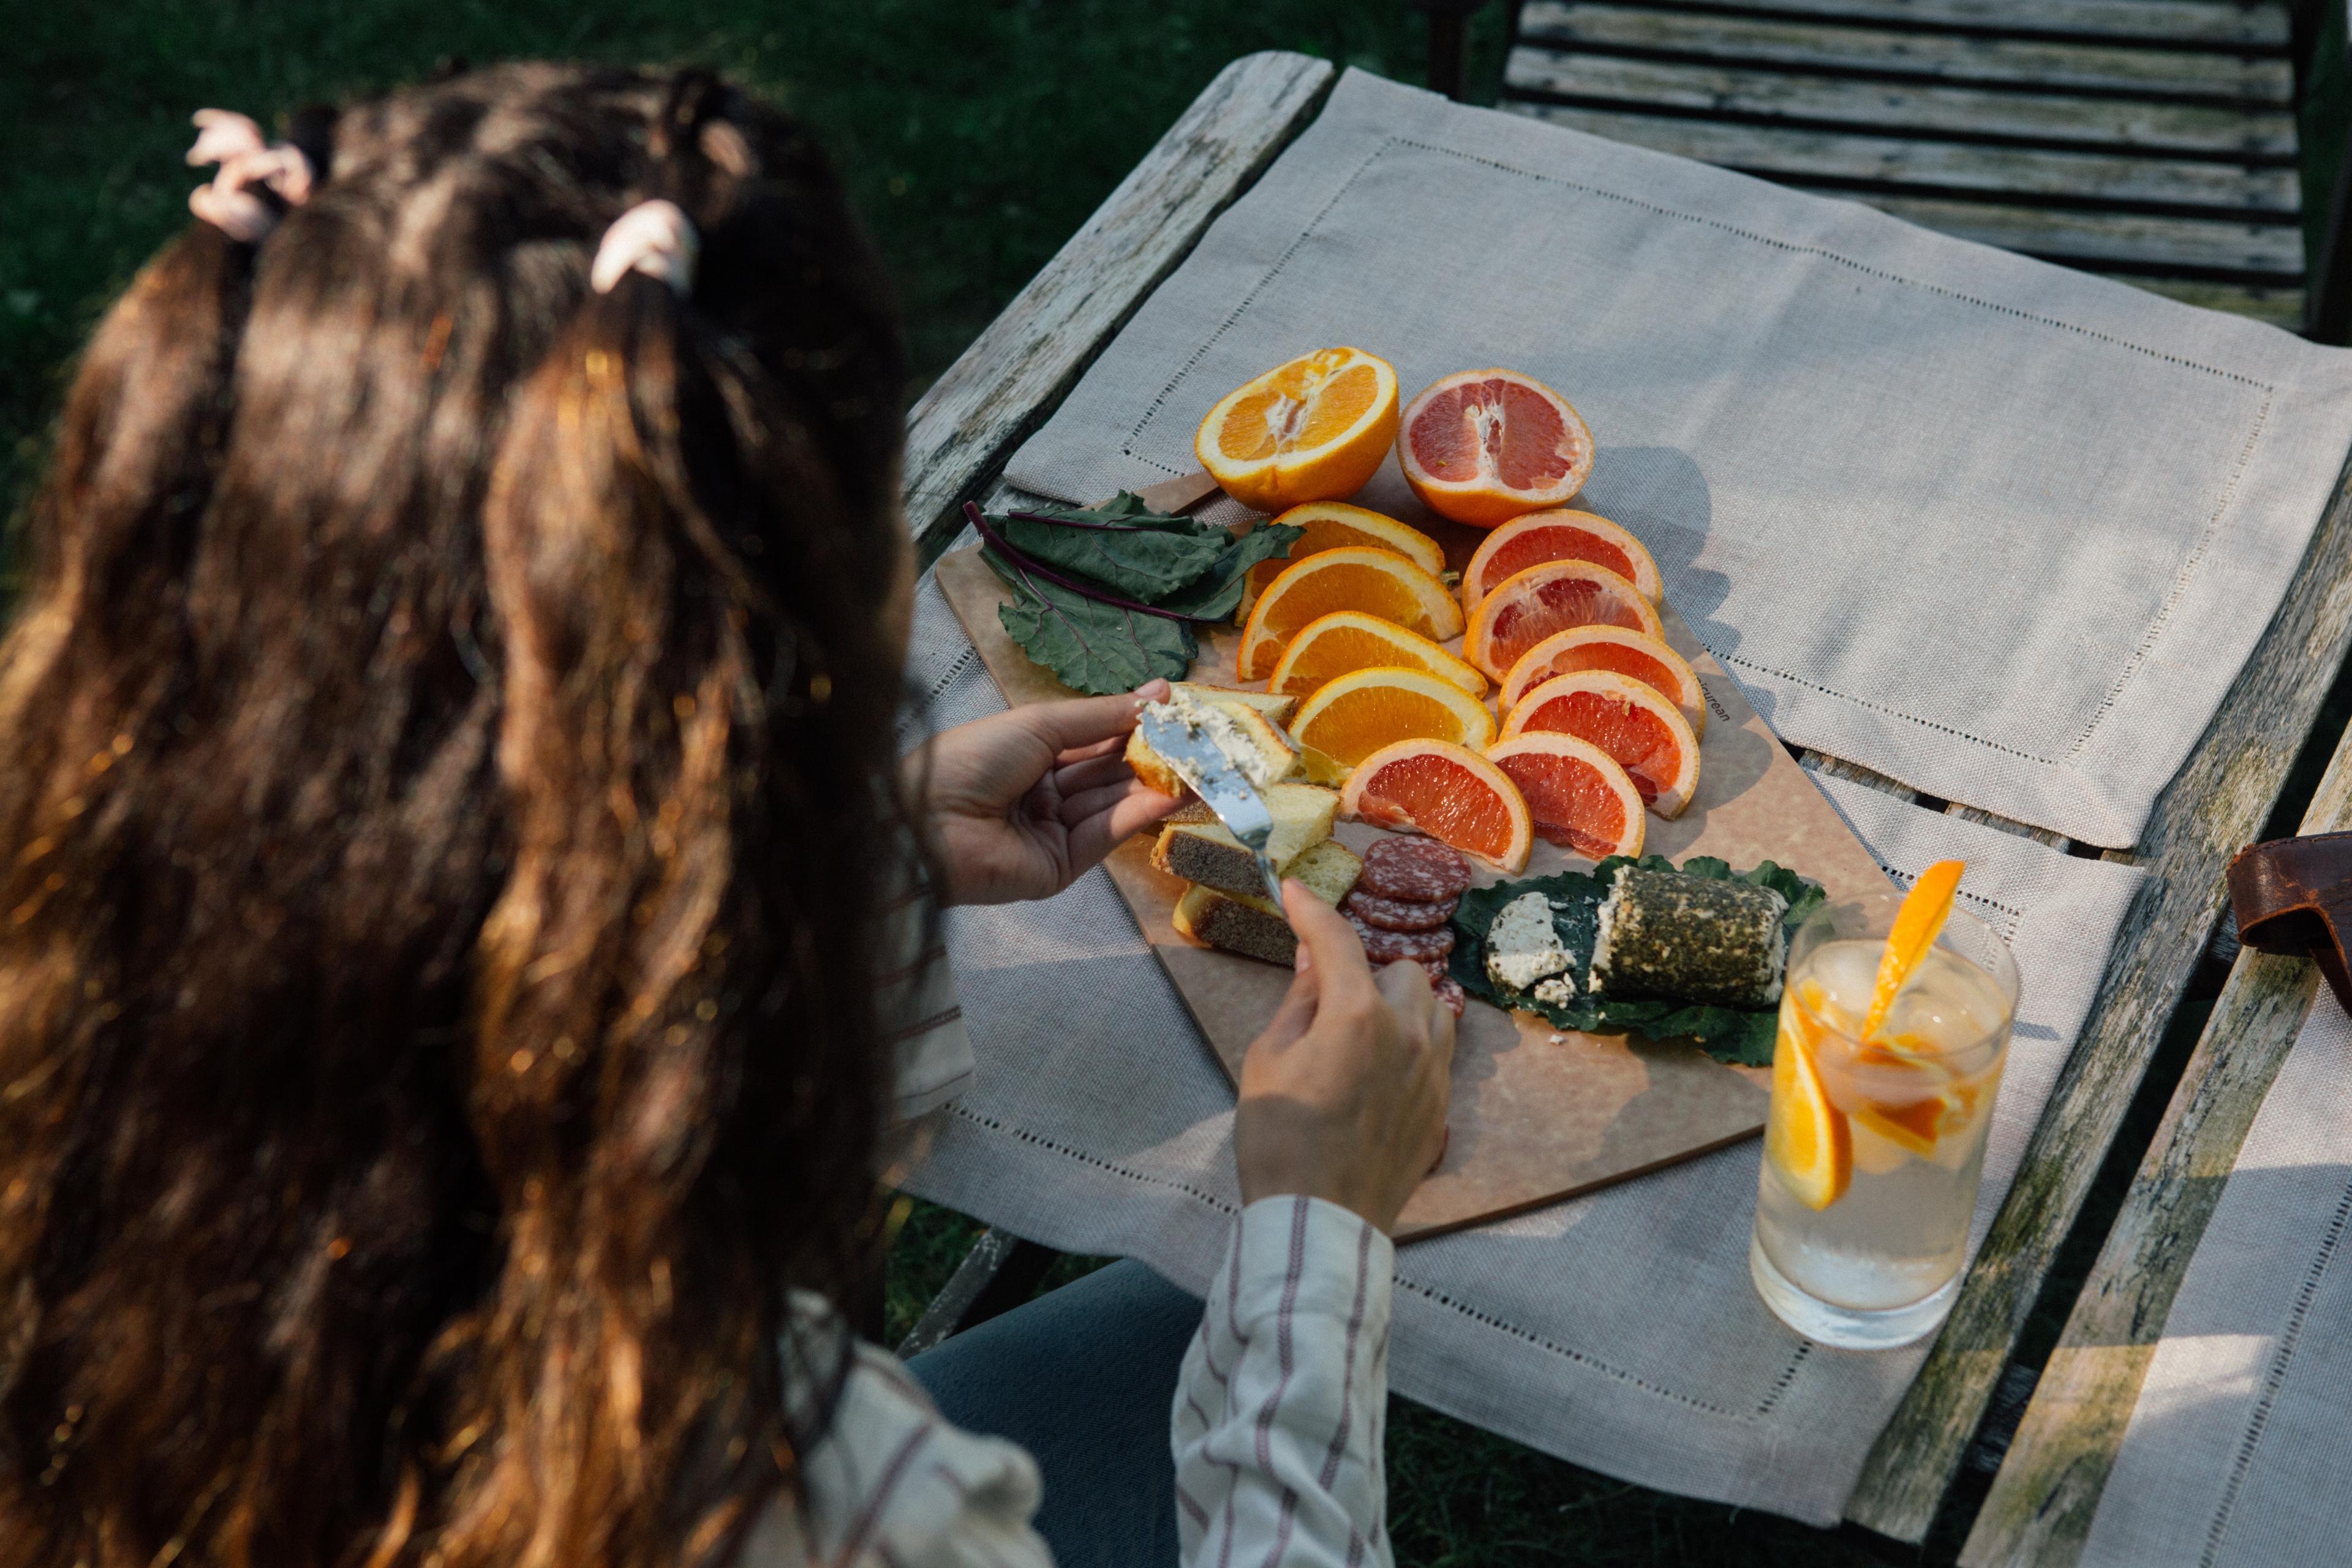 A girl with her back to the camera eating a snack of goat cheese and sliced oranges